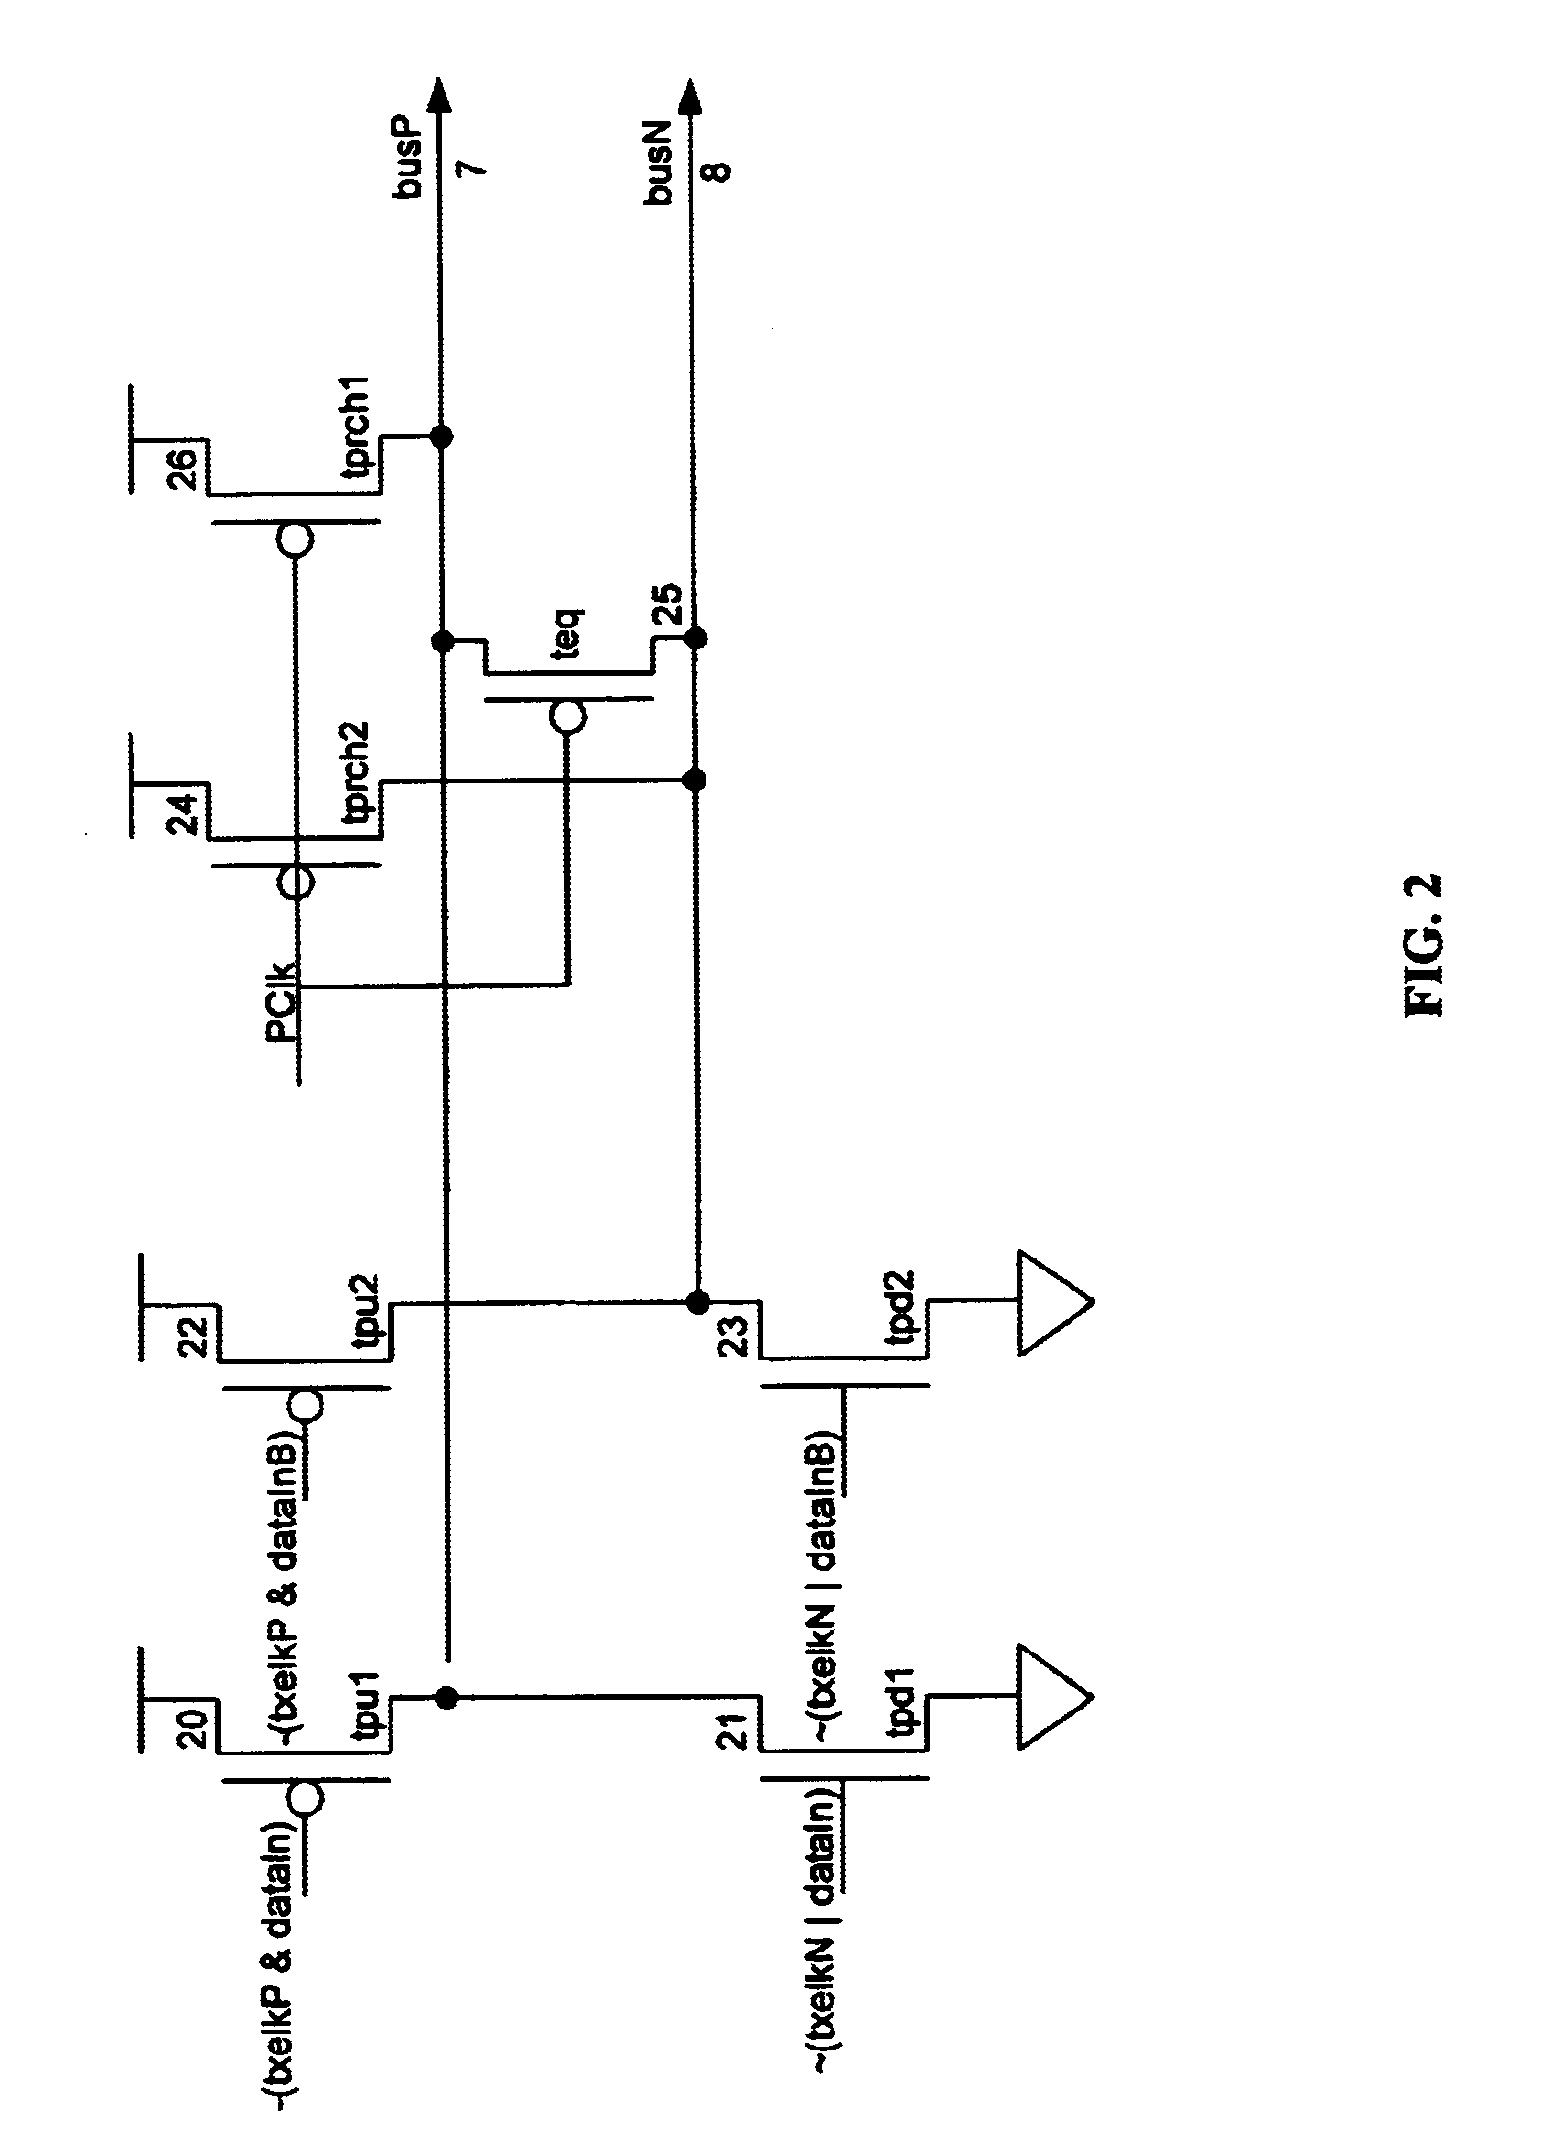 System and method for a high speed, bi-directional, zero turnaround time, pseudo differential bus capable of supporting arbitrary number of drivers and receivers